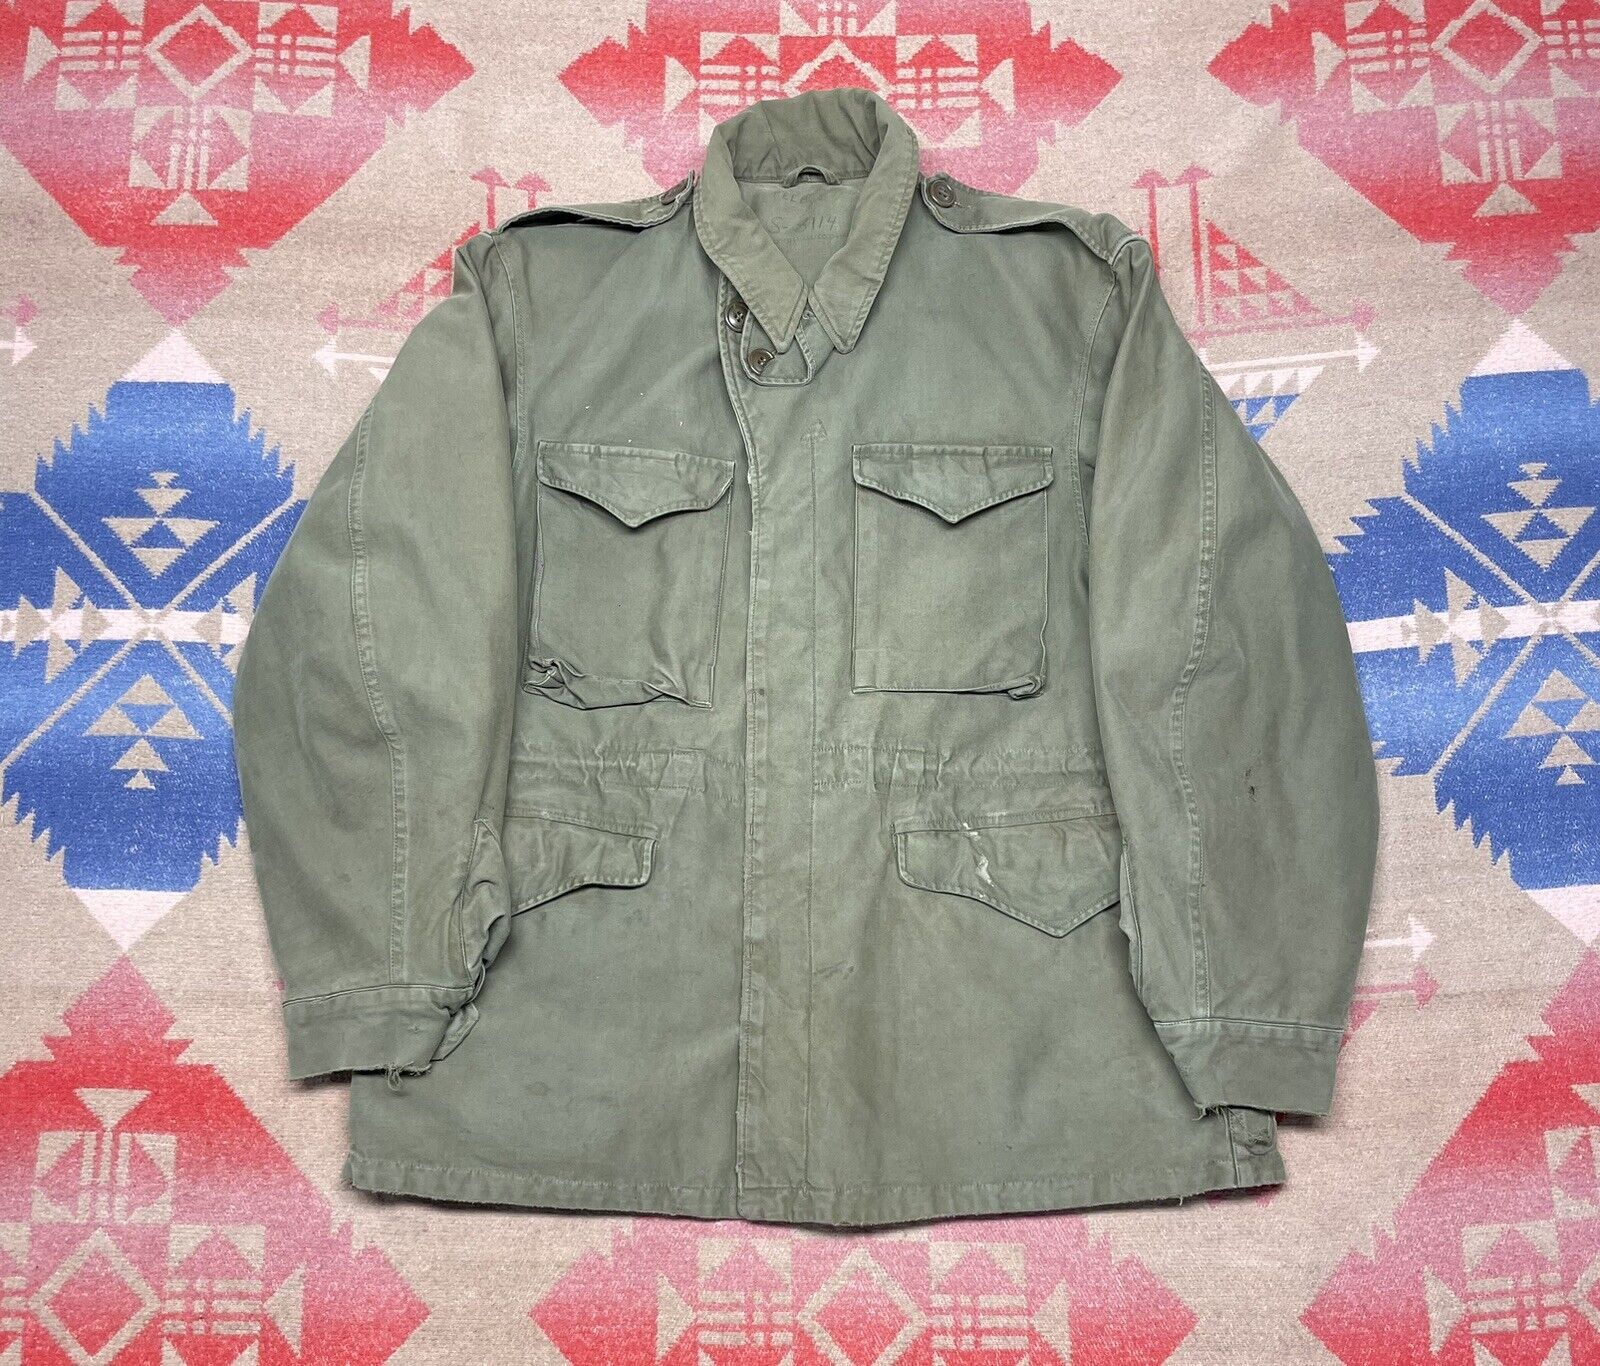 Vintage 1940s WWII US Army M43 Field Jacket Cold Weather